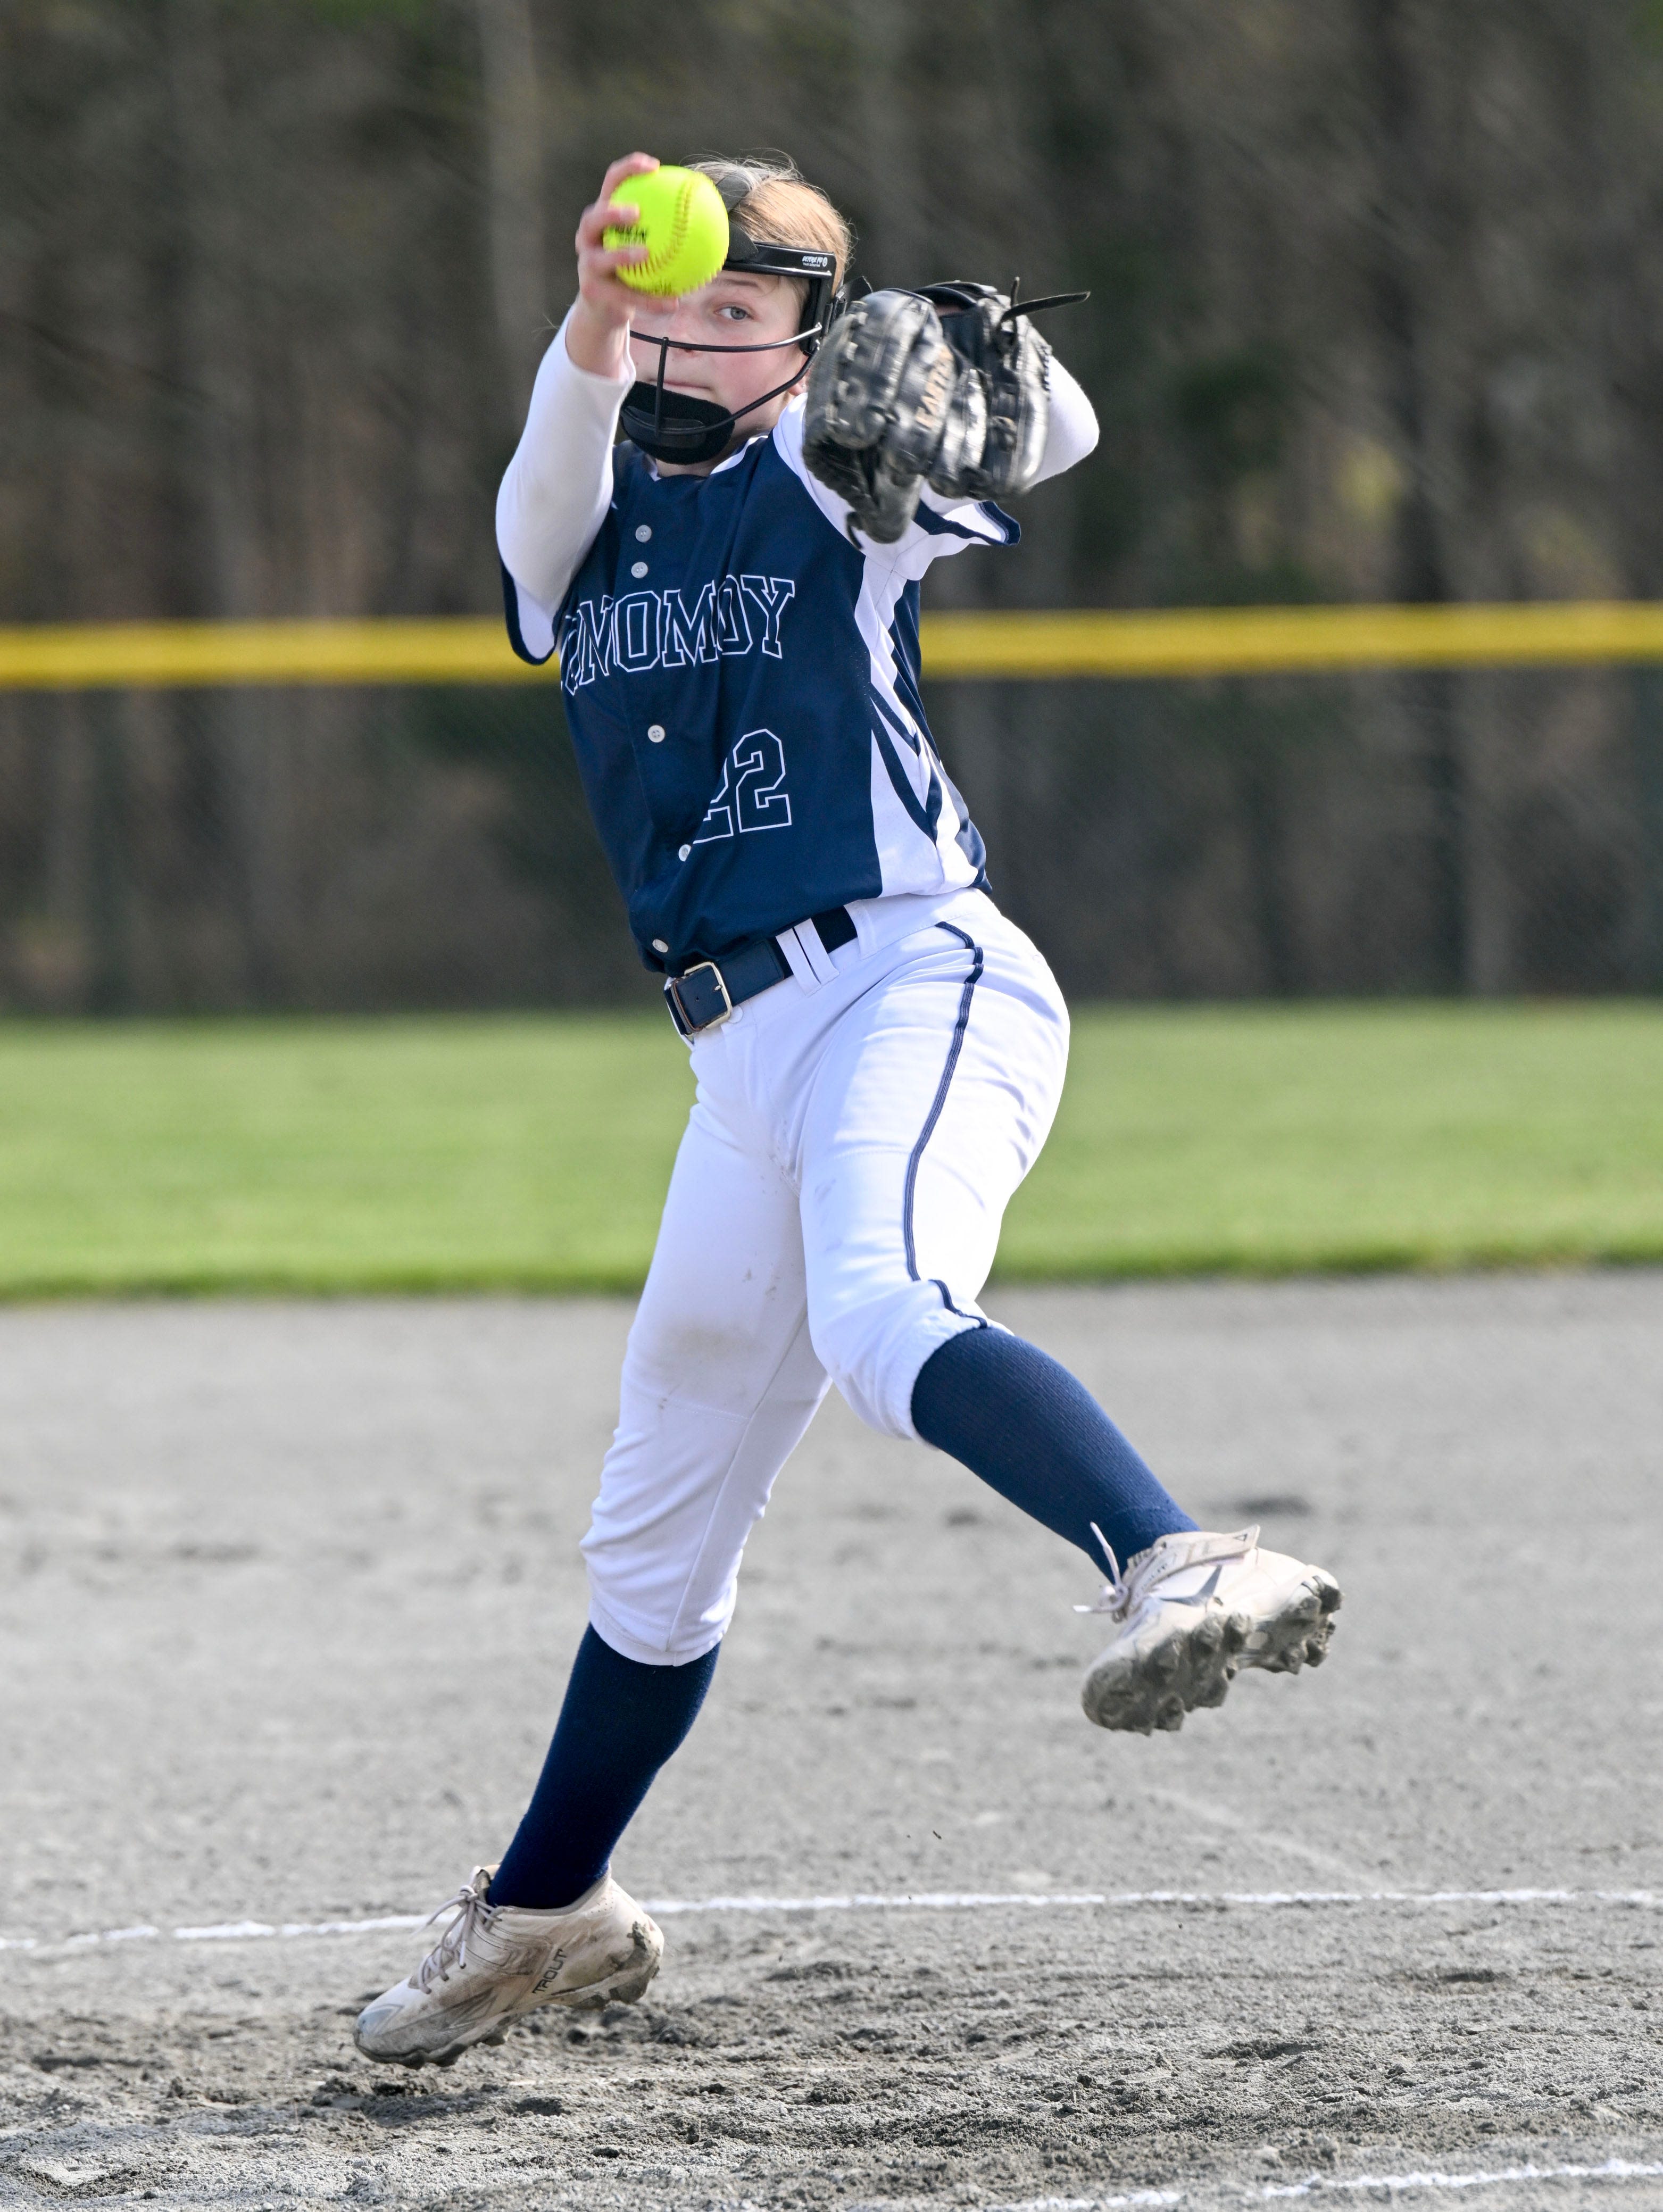 8th grader Kinsey Lister pitching star at Monomoy in seventh straight win